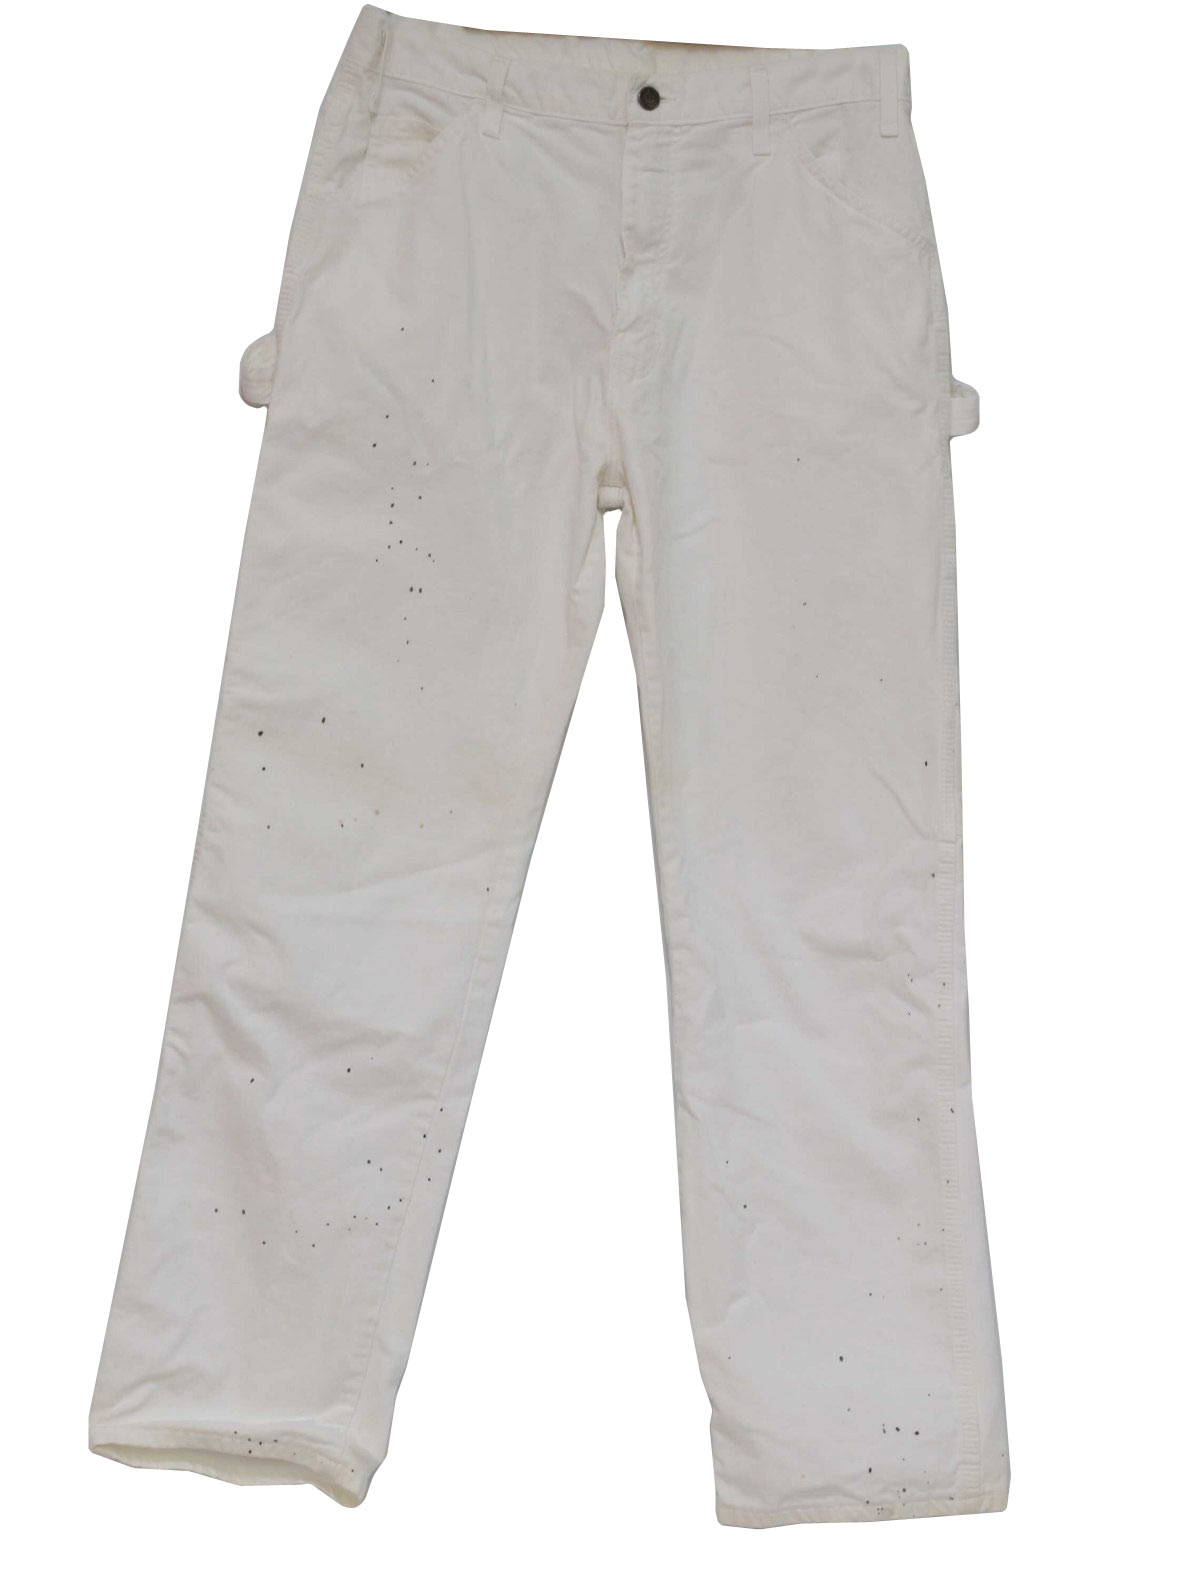 Retro Eighties Pants: 80s -Dickies- Mens white straight leg relaxed fit ...